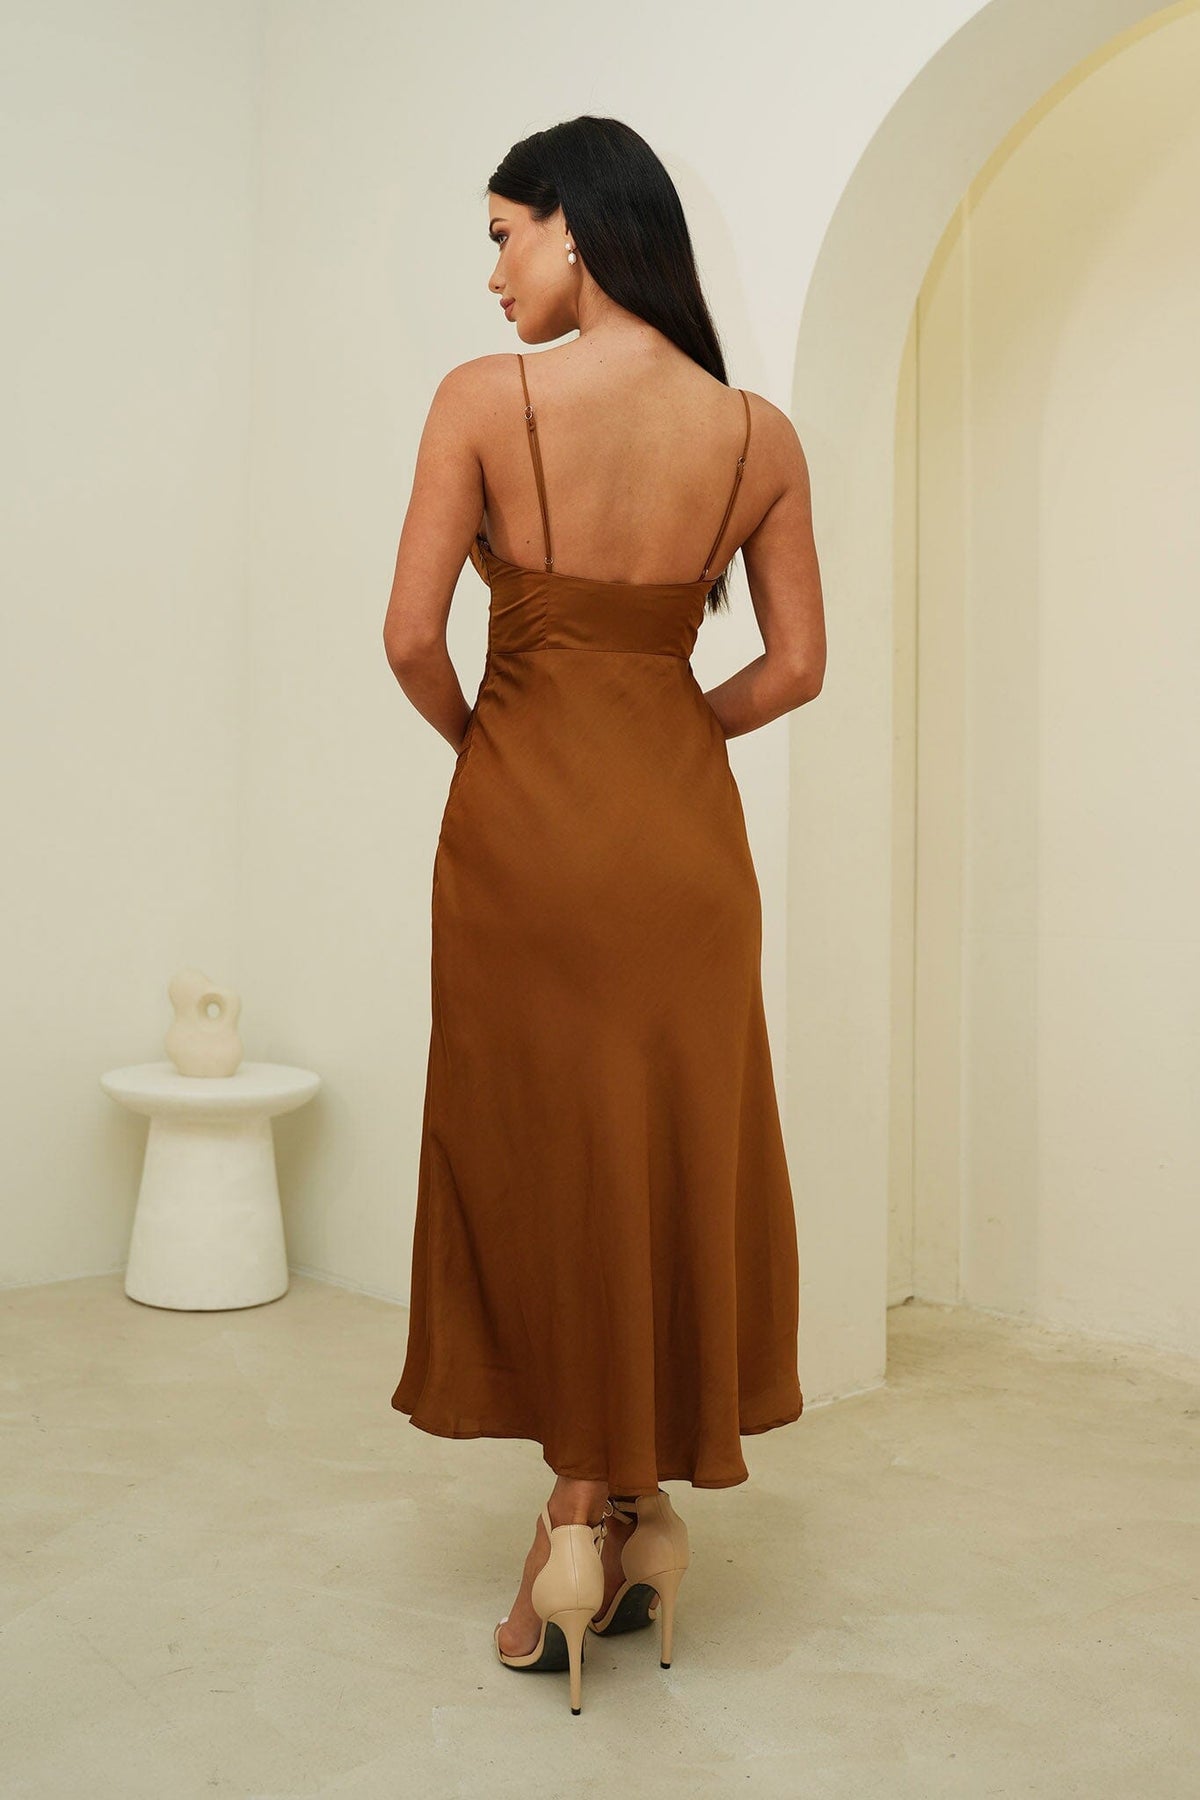 Open Back and Adjustable Thin Straps of Satin Look Summer Midi Dress with Ruched Bust Detail and Thin Straps in Chocolate Brown Colour